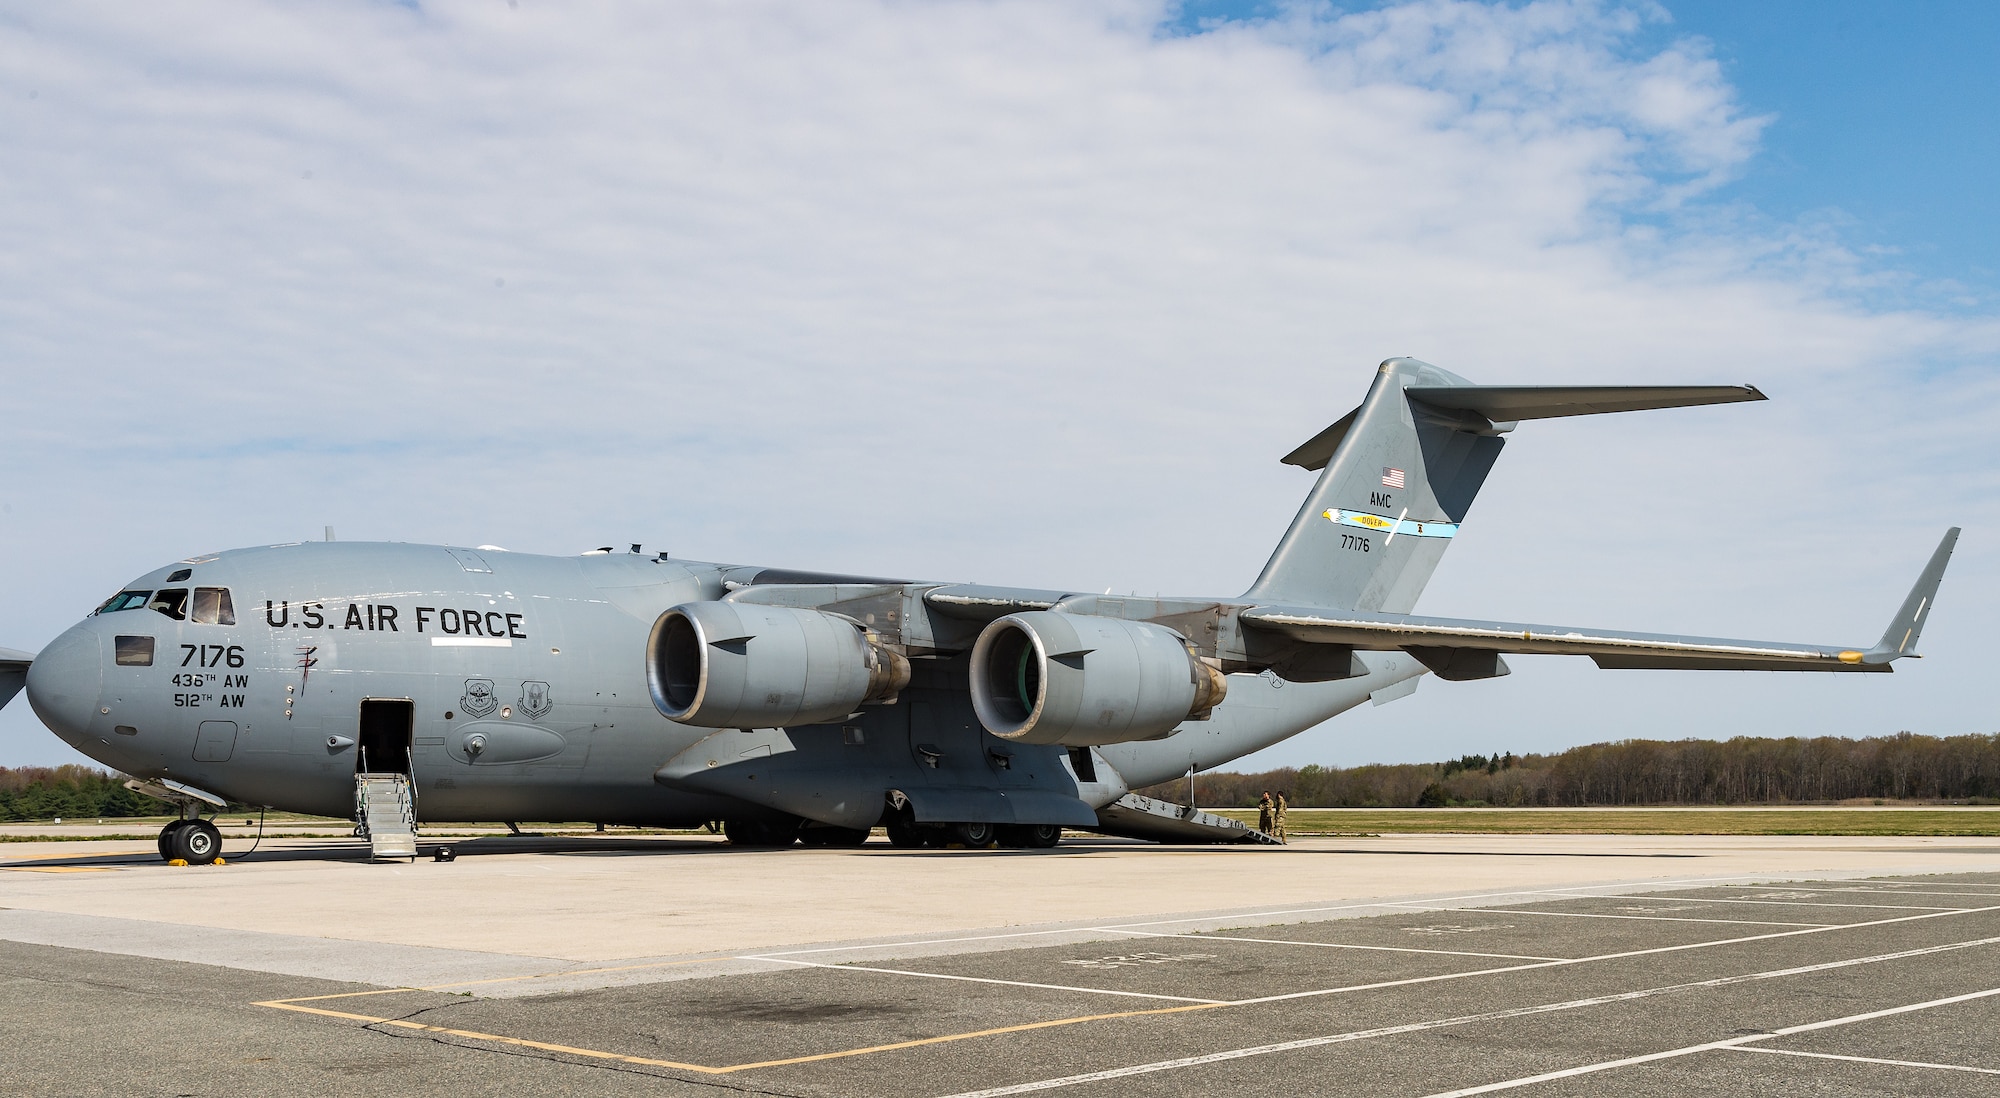 A C-17 Globemaster III is prepared for maintenance on the flight line at Dover Air Force Base, Delaware, April 7, 2021. The inherent flexibility and performance of the C-17 force improve the ability of the total airlift system to fulfill the worldwide air mobility requirements of the United States. Thirteen C-17s are assigned to Dover AFB. (U.S. Air Force photo by Roland Balik)